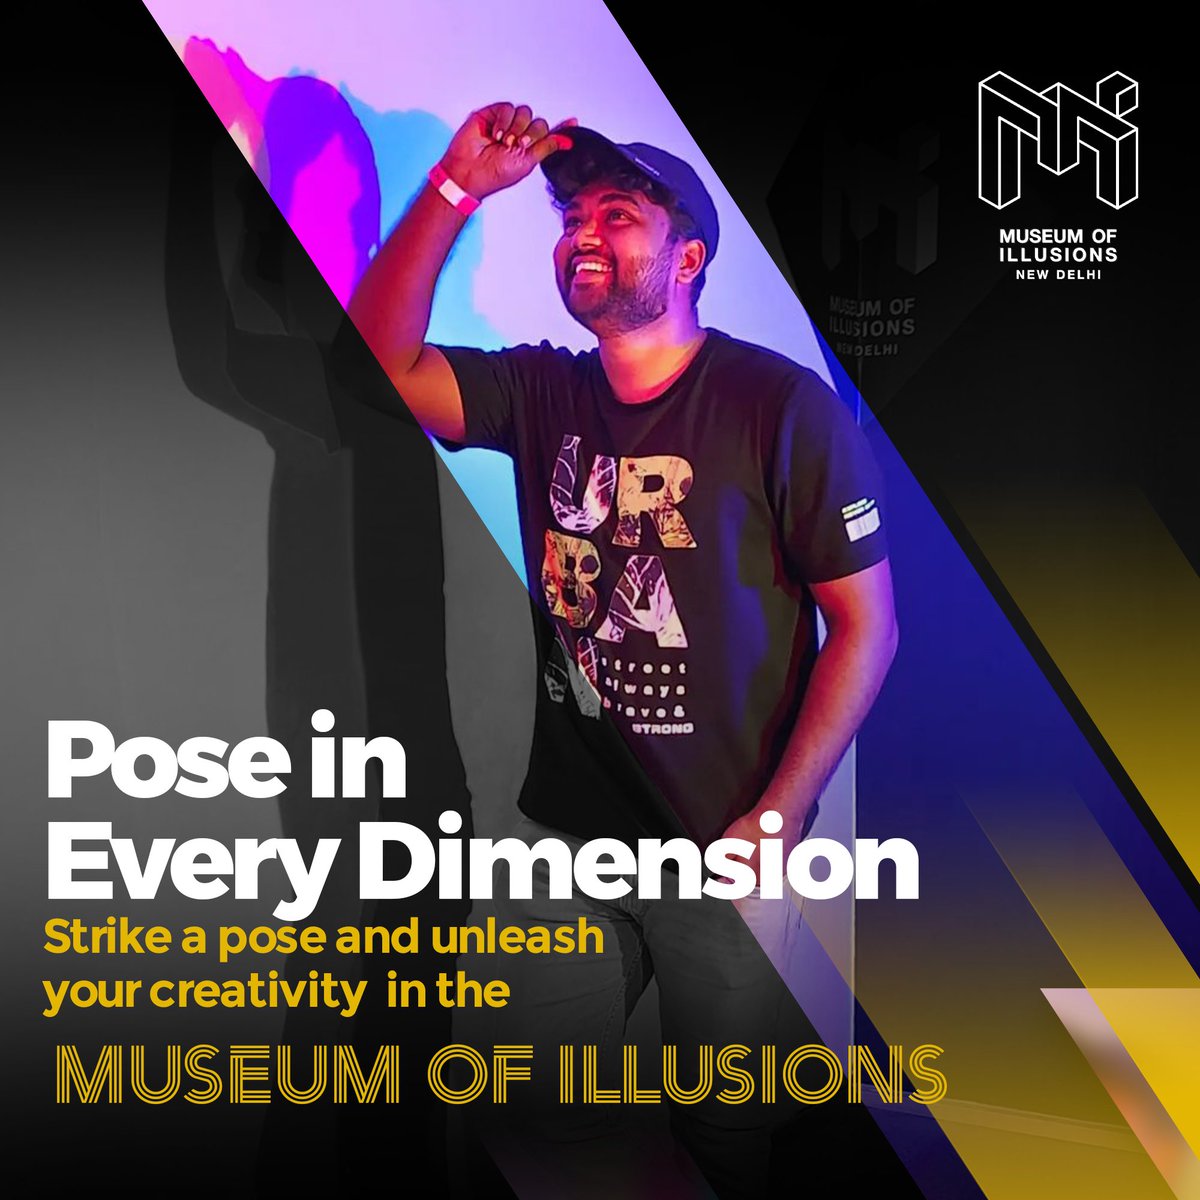 Step into a world where reality and imagination collide🎭 

Here you defy gravity and capture mesmerizing moments in every dimension🌟

🎫Visit Us: Museumofillusions.in
.
.
#MuseumOfIllusionsNewDelhi #Illusions #RealityVsIllusion #DelhiAttractions #MustVisitDelhi